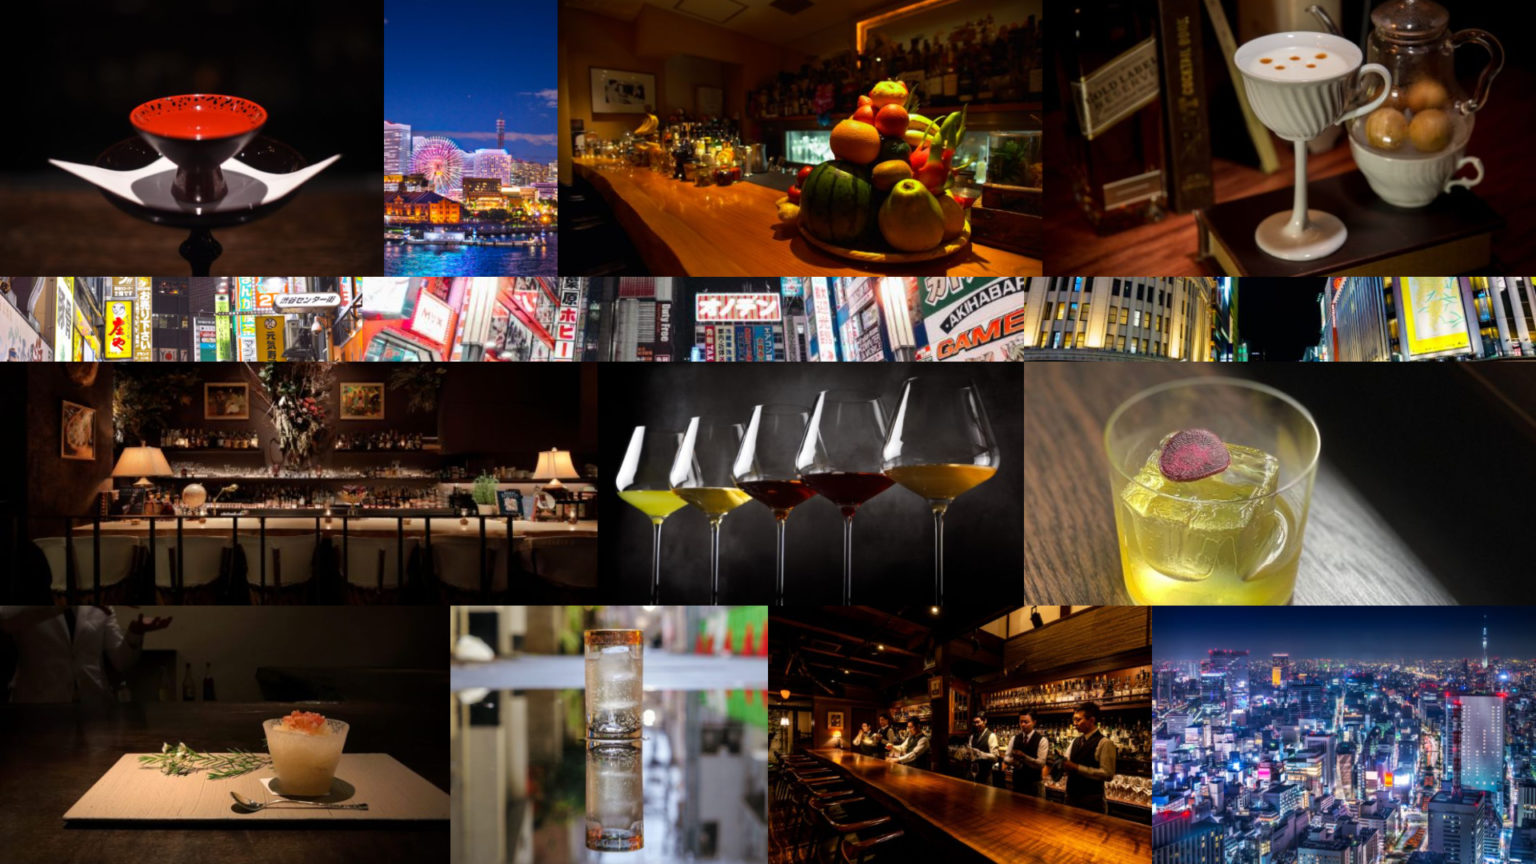 Asia's 50 Best Bars launches 51100 list, this year's includes 14 in